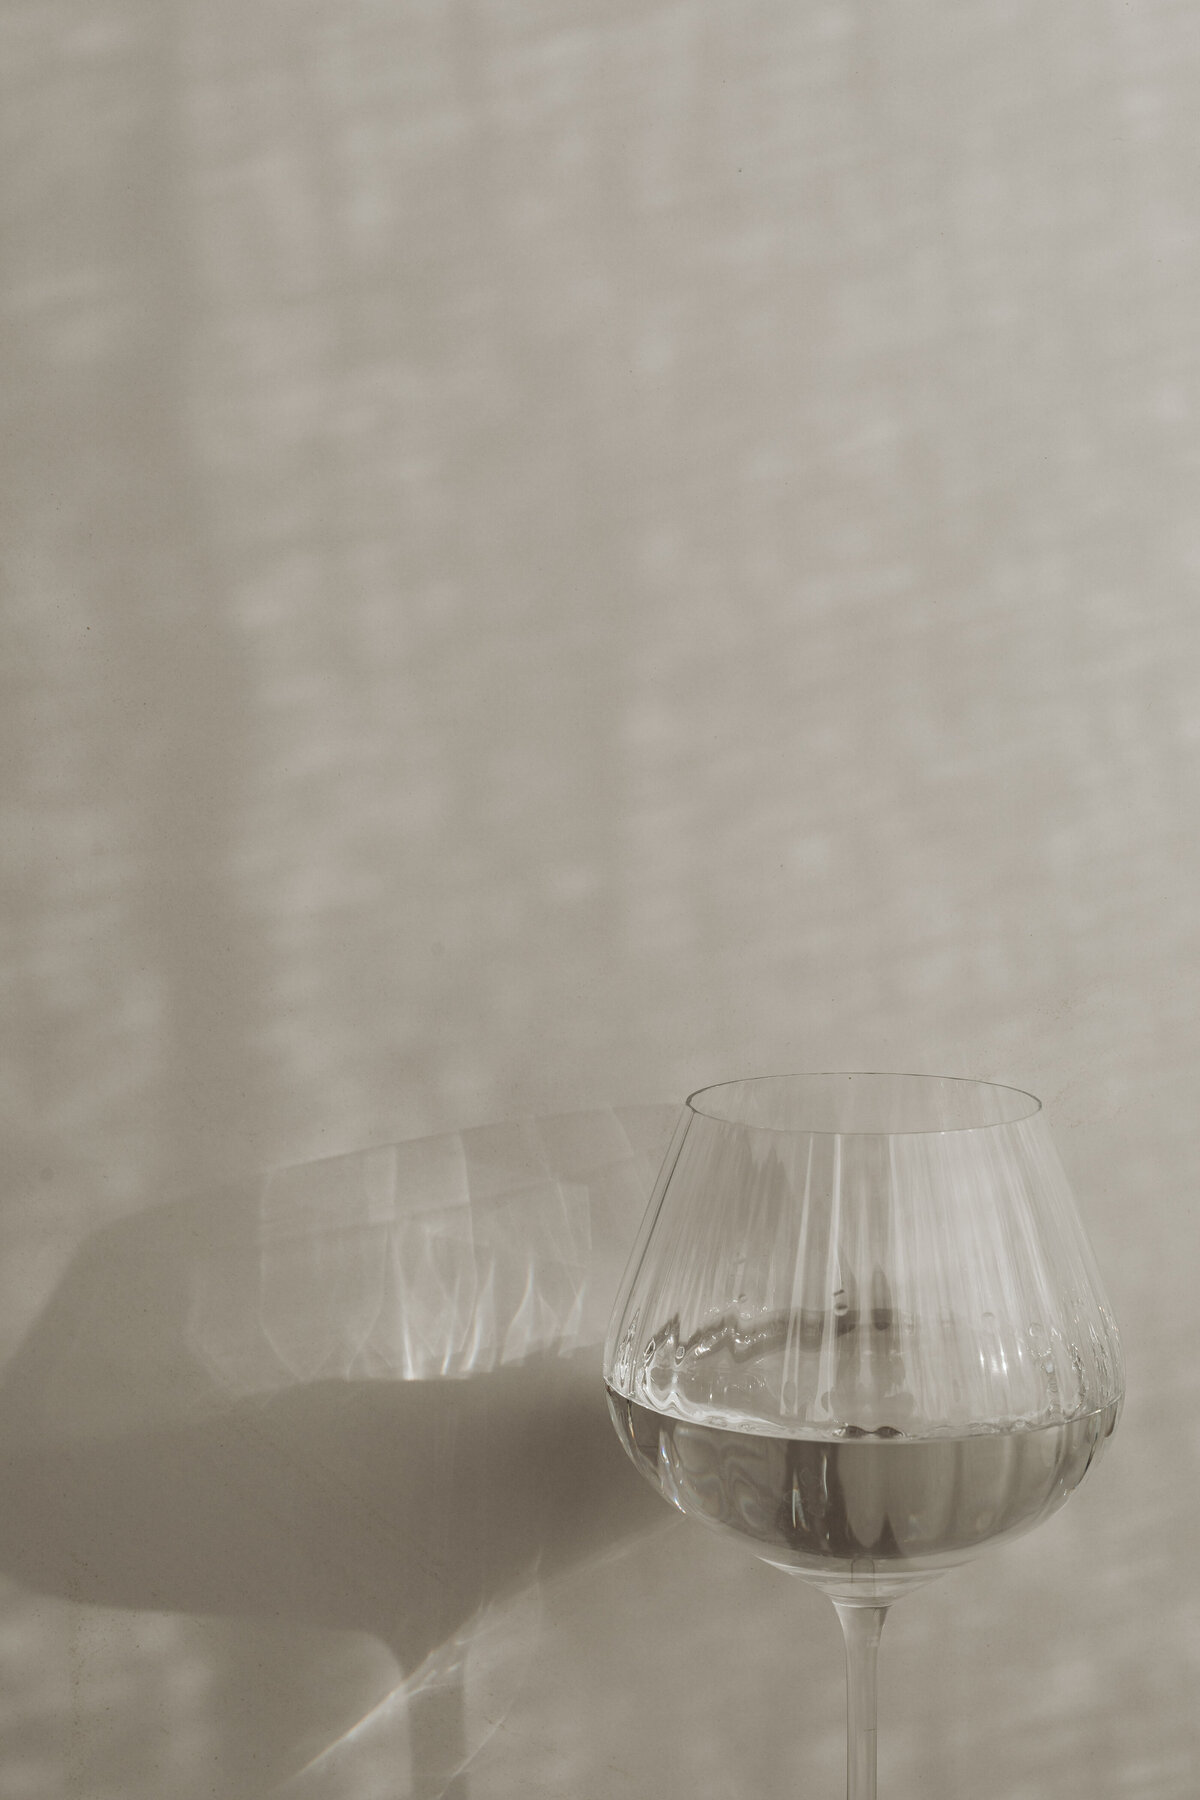 kaboompics_water-in-wine-glass-shadows-backgrounds-28815